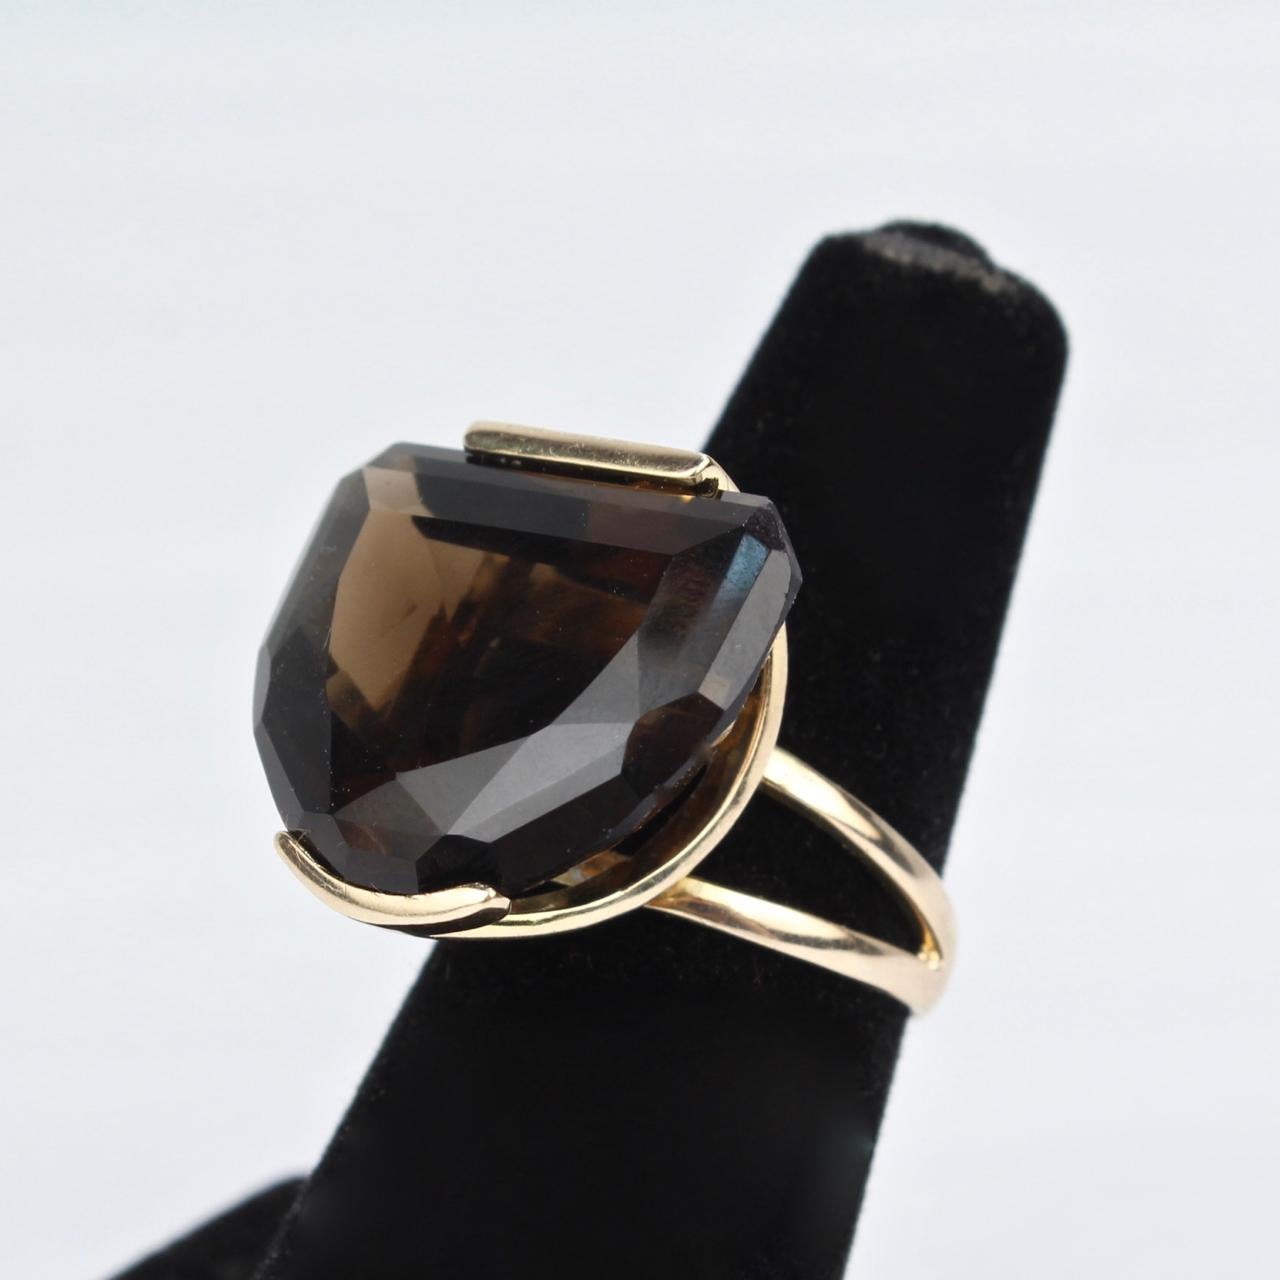 A big Modernist 14K yellow gold cocktail ring.

With a half-moon smoky topaz gemstone tension set in semi-circular open basket. 
It has a split shank that repeats the 'open' design of the basket.

Stamped 14K to the shank for gold fineness.

A great